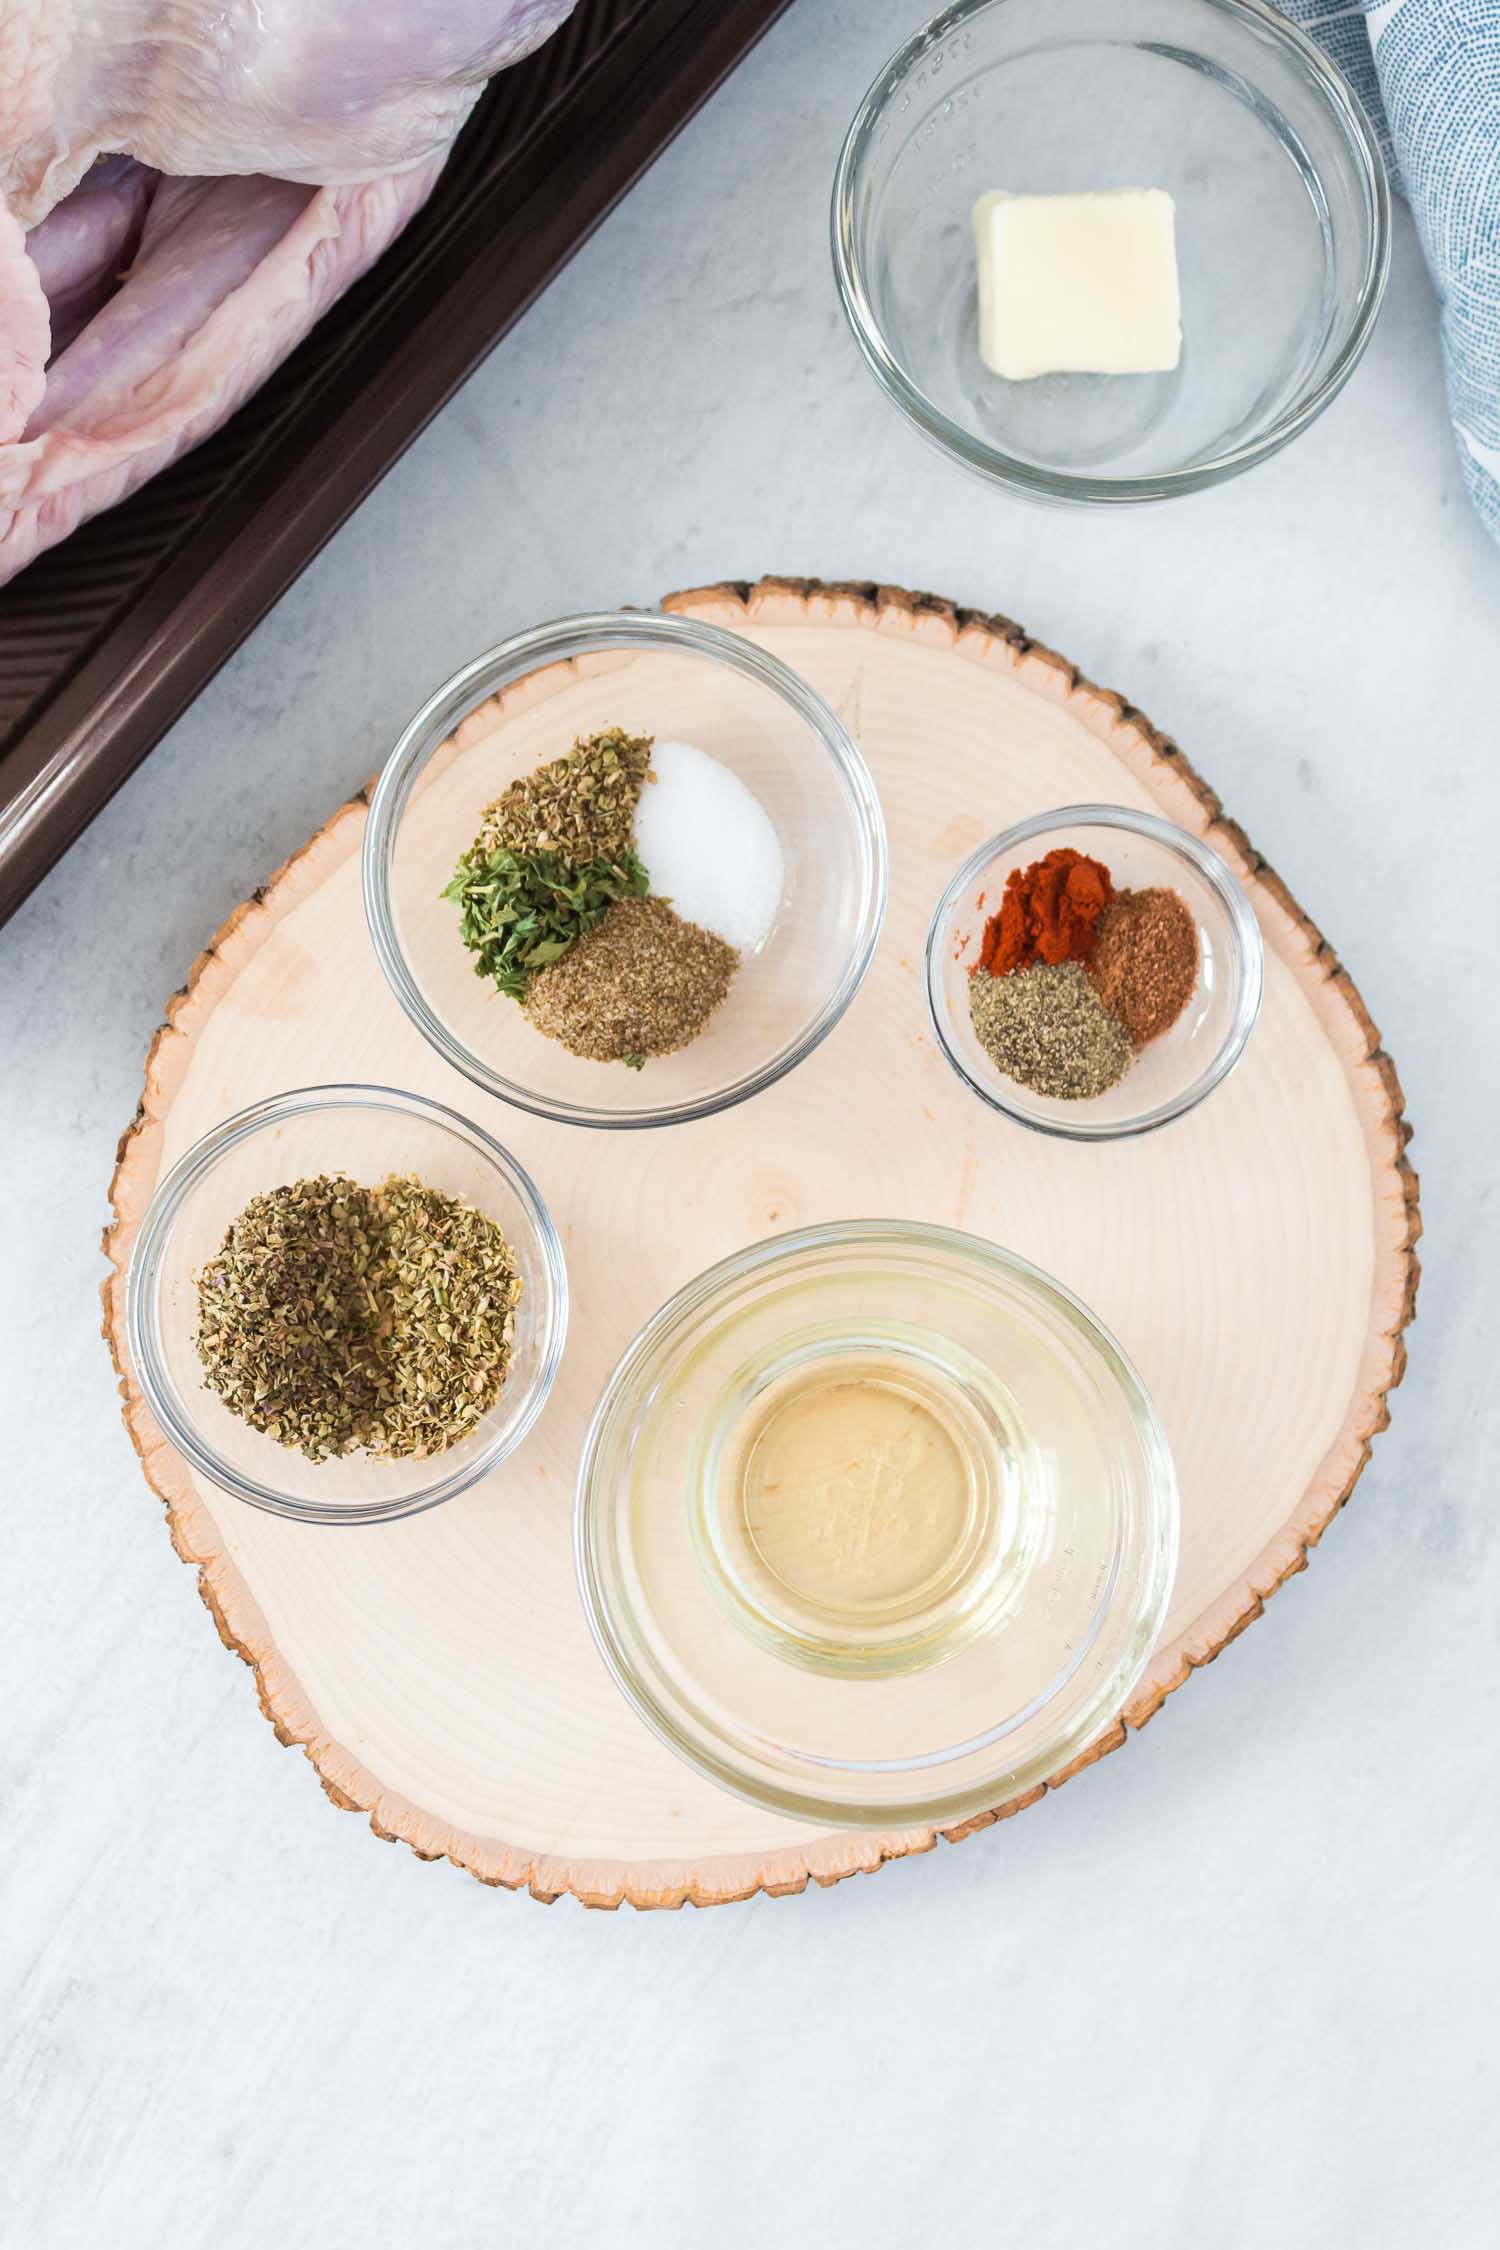 A wood board with four glass bowls filled with spices on it  and a glass bowl with a pat of butter on the side.